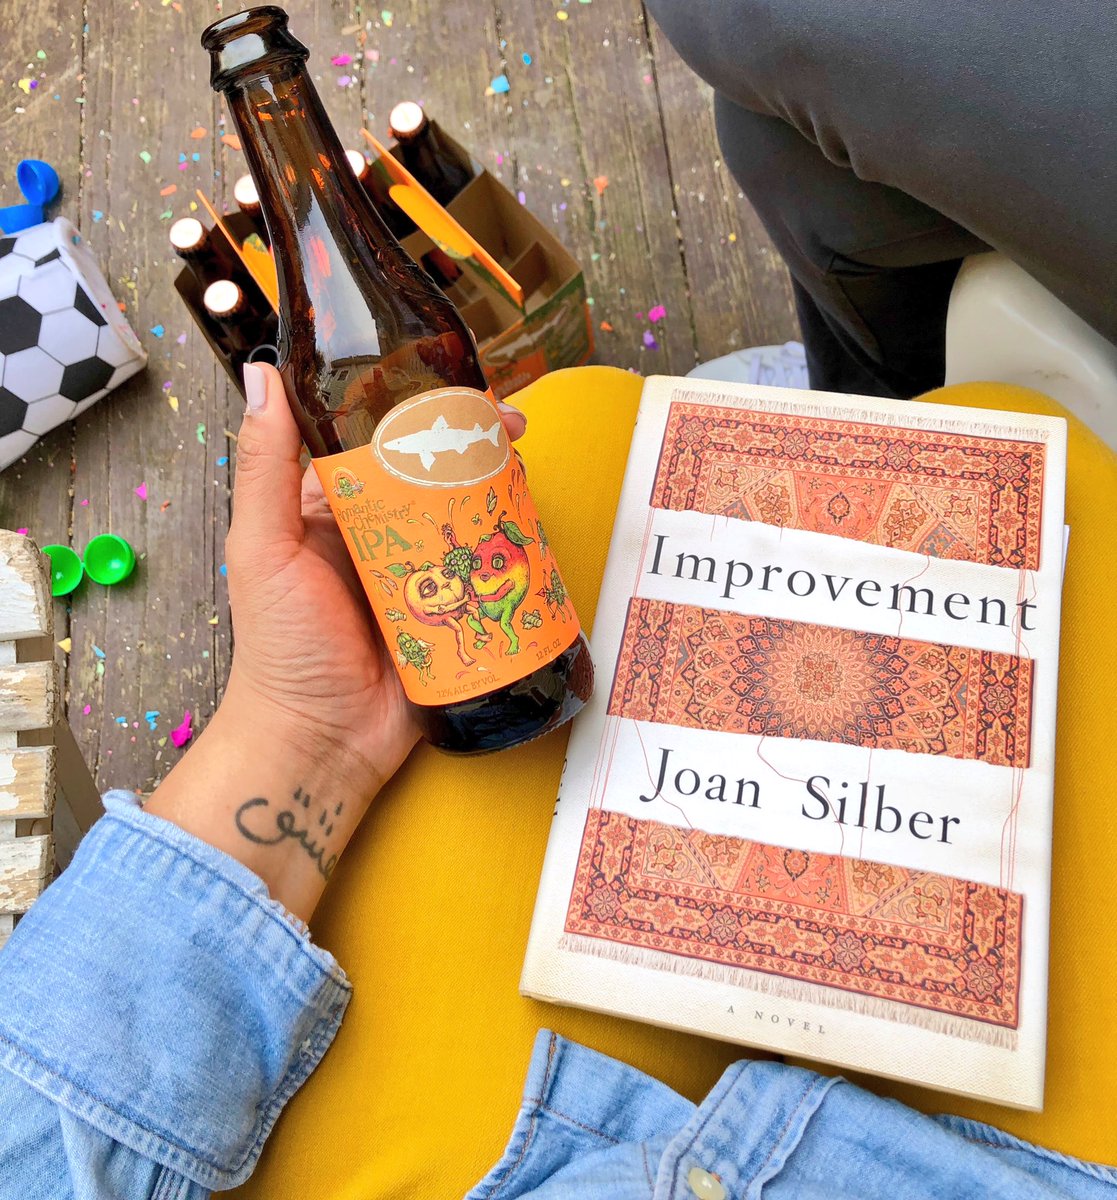 Post Easter #Bookandbeer post featuring #Improvement by #JoanSilber (@CounterpointLLC) & #RomanticChemistryIPA by @dogfishbeer 😍❤️🍺📚